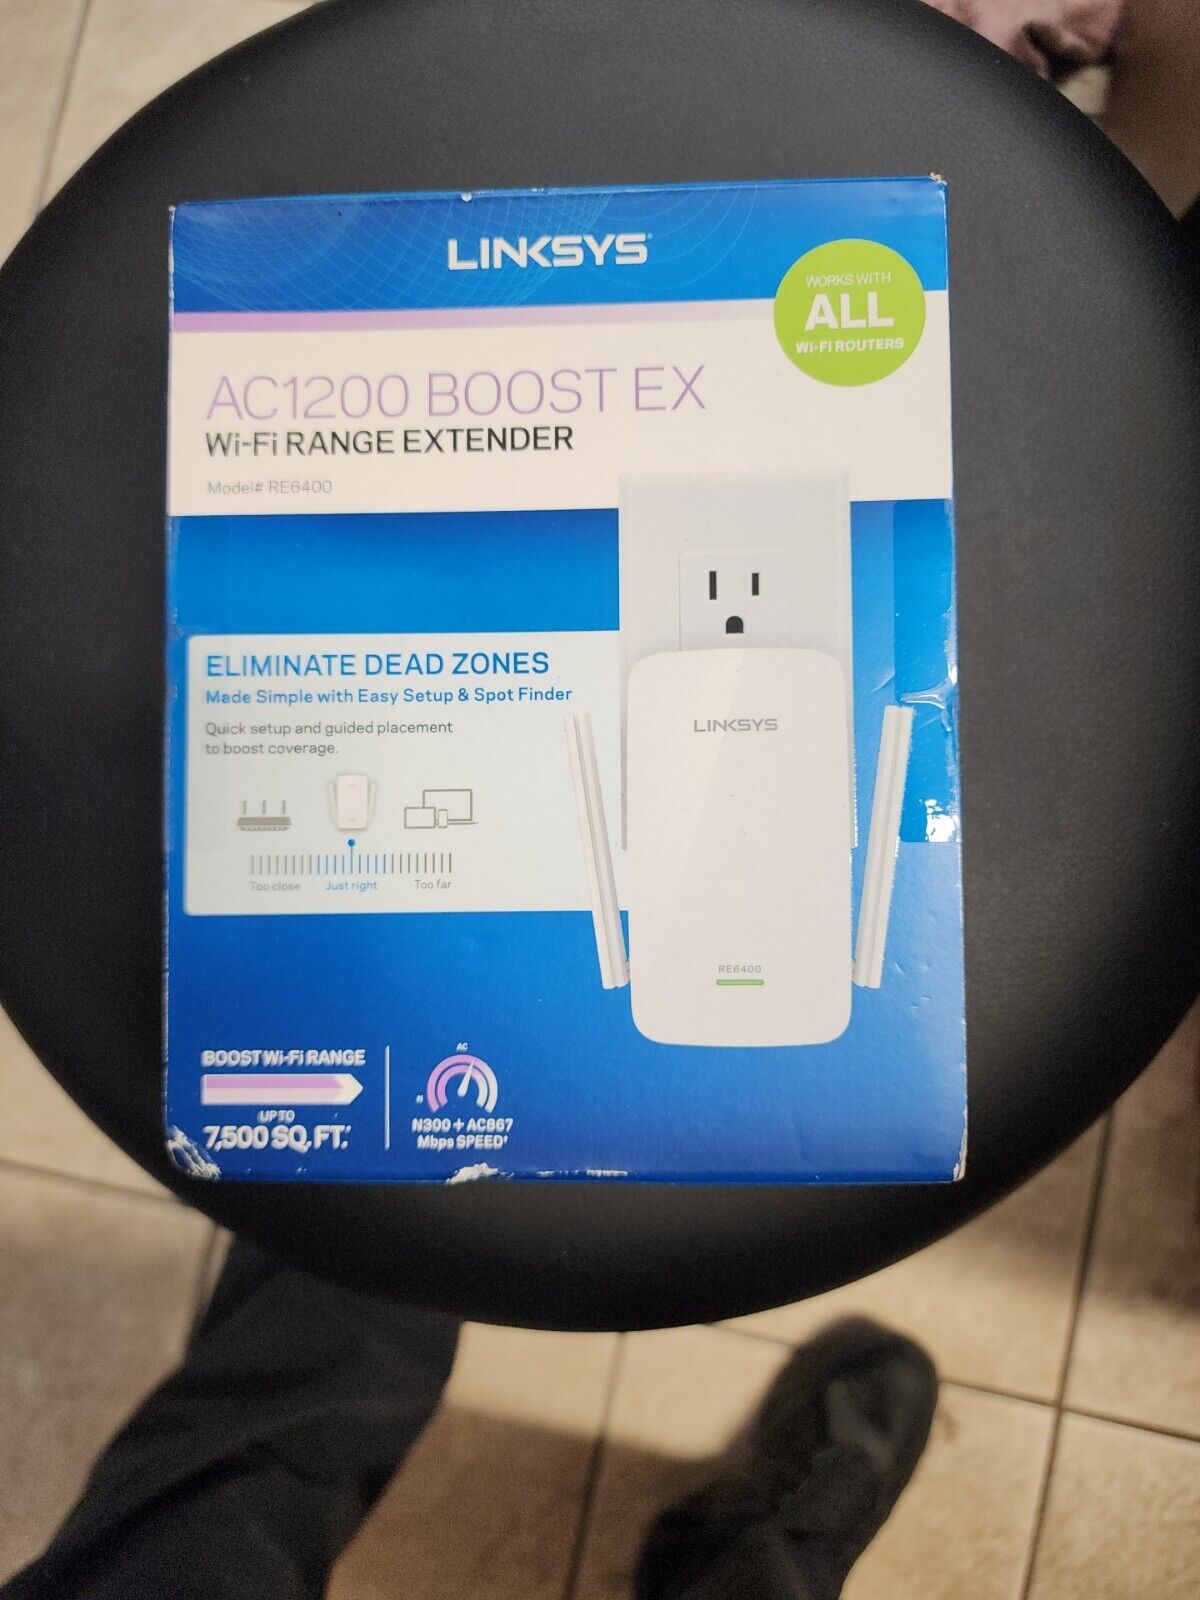 Linksys RE6400 AC1200 BOOST EX WiFi Extender Brand New Sealed 